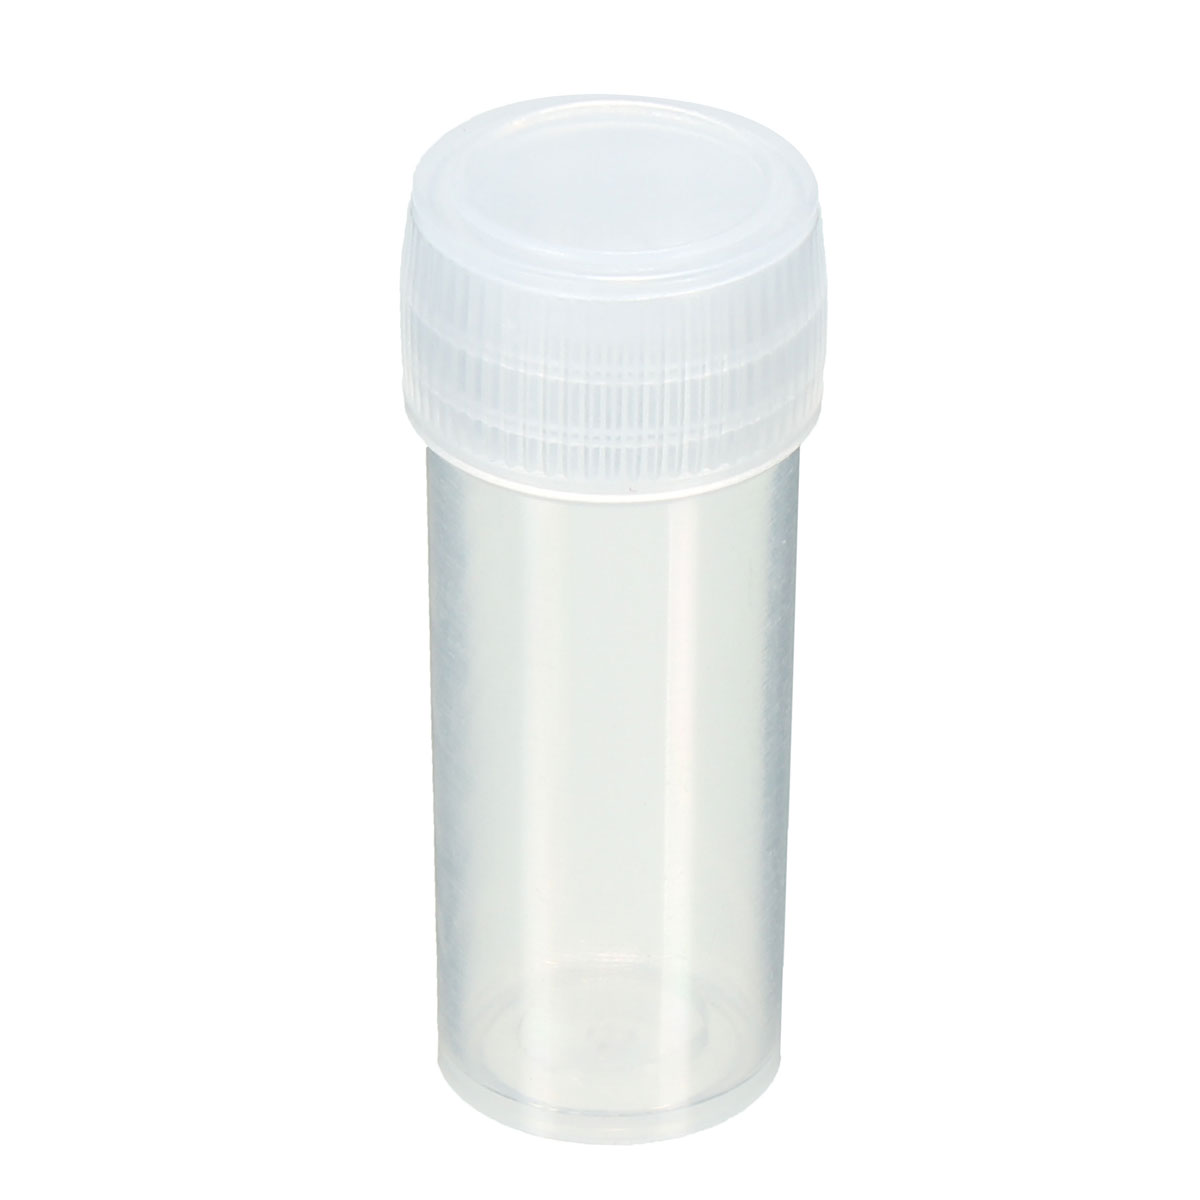 20Pcs-5ml-Chemistry-Plastic-Test-Tube-Vials-with-Seal-Caps-Pack-Container-1300038-5